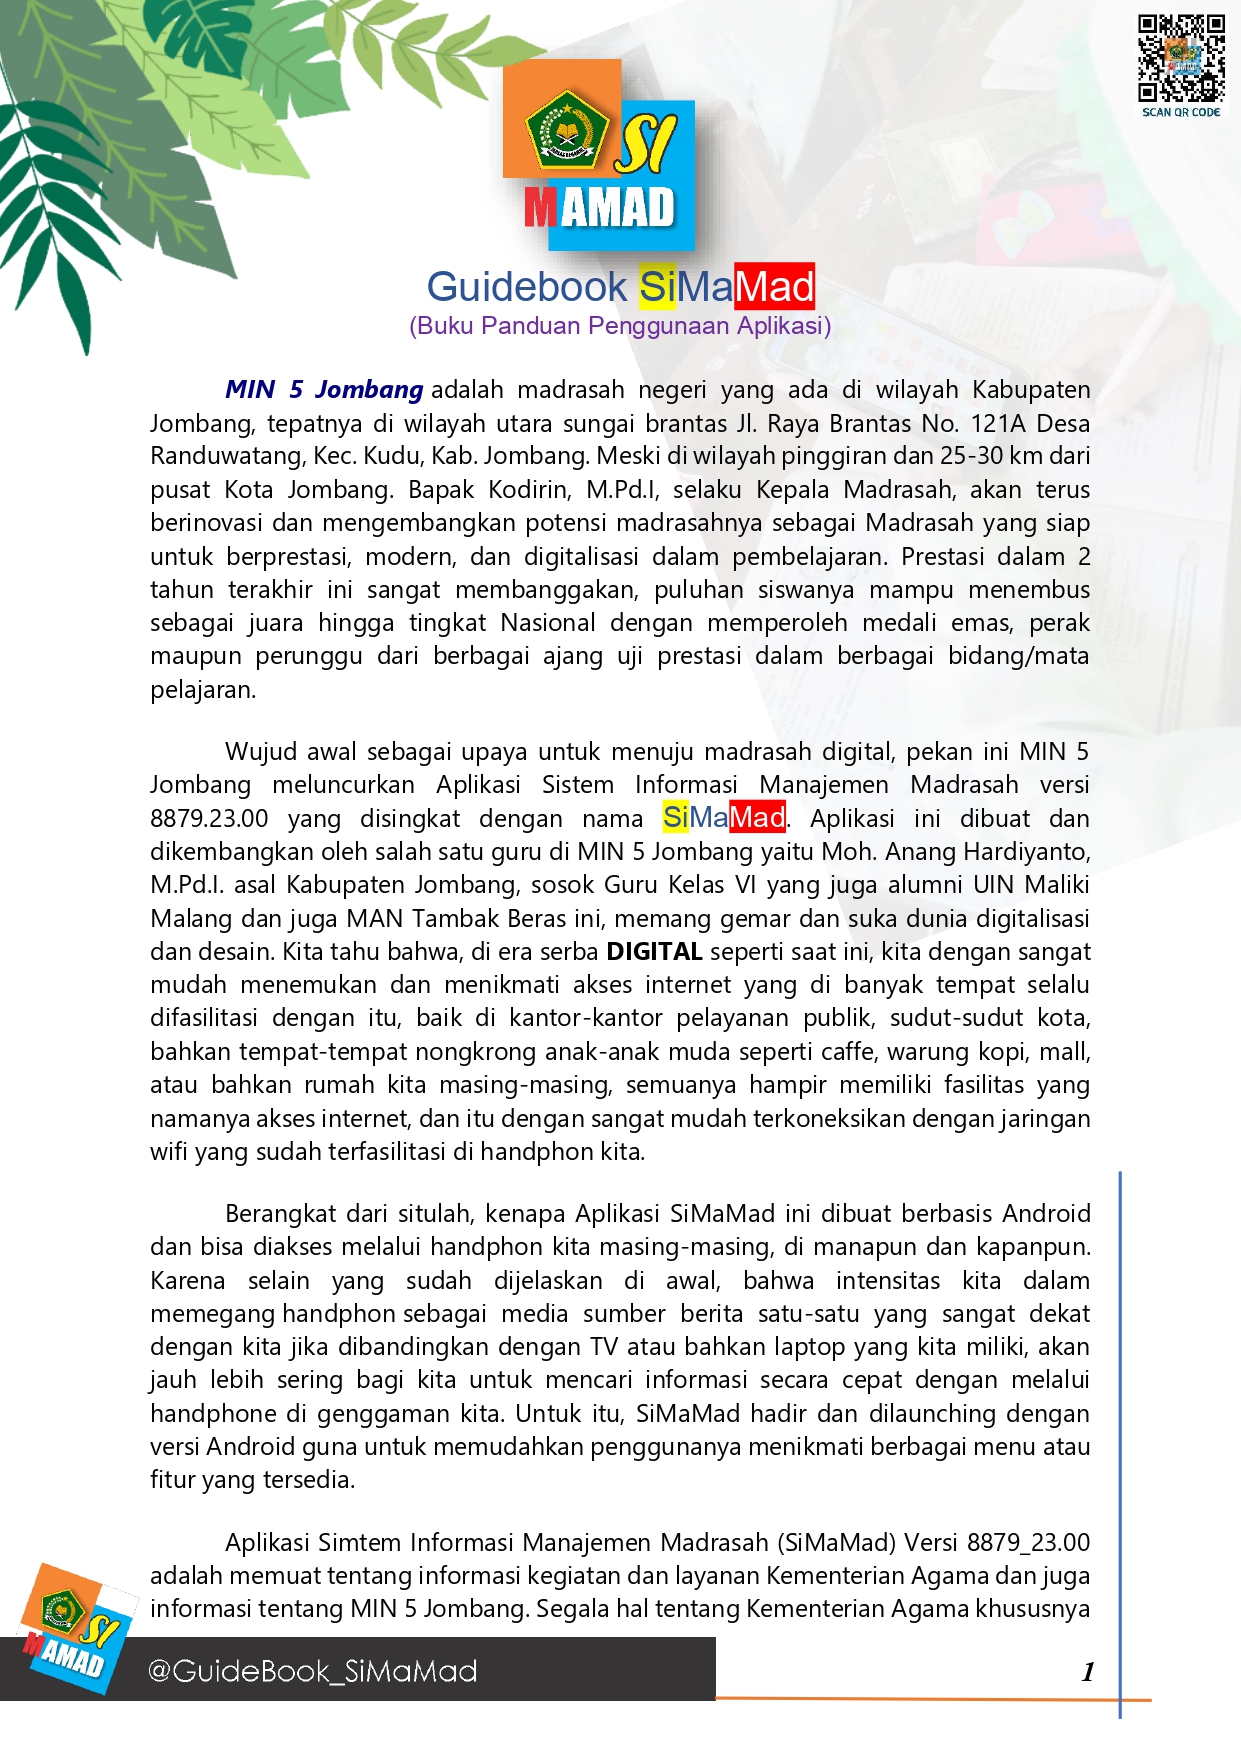 Guidebook SiMaMad Final_page-0001